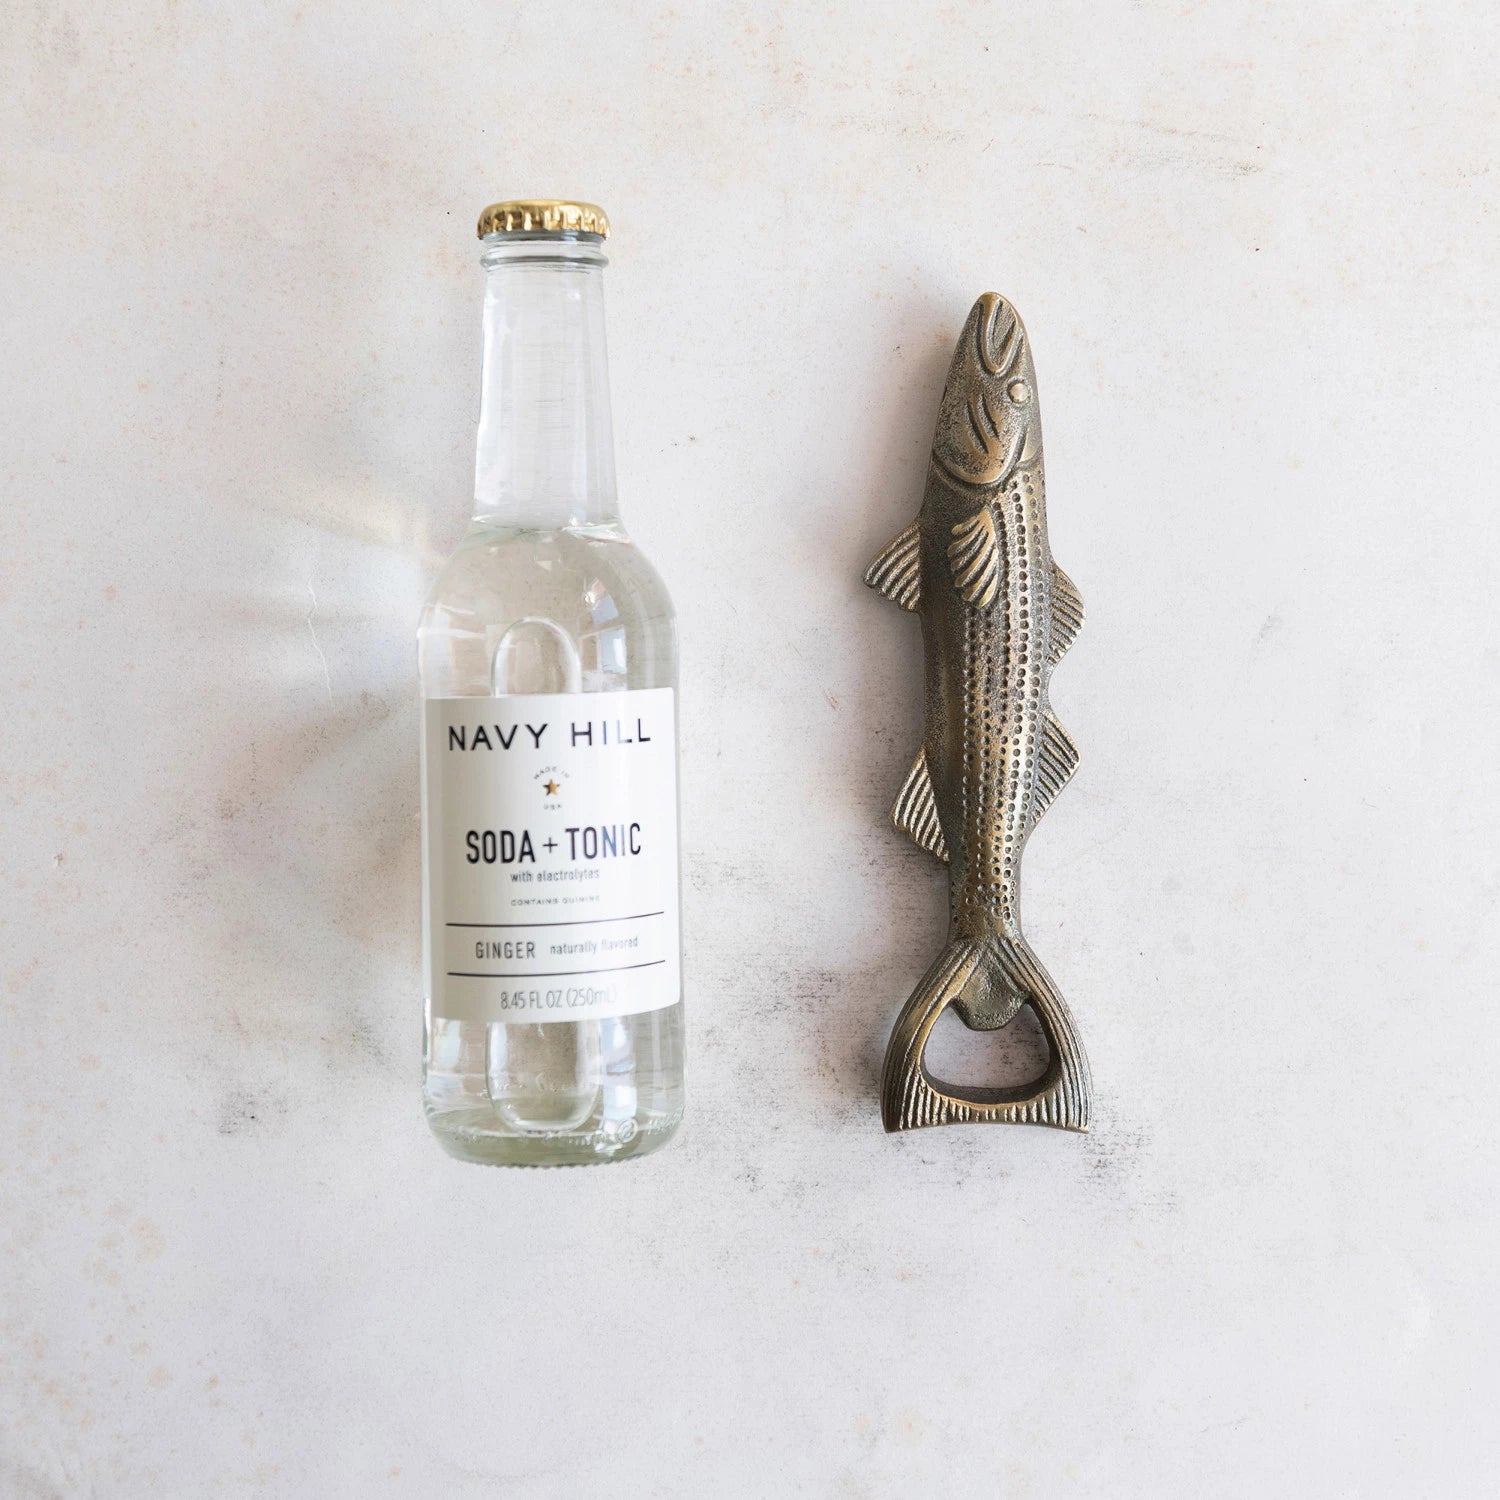 fish shaped bottle opener laying next to a bottle of soda and tonic.